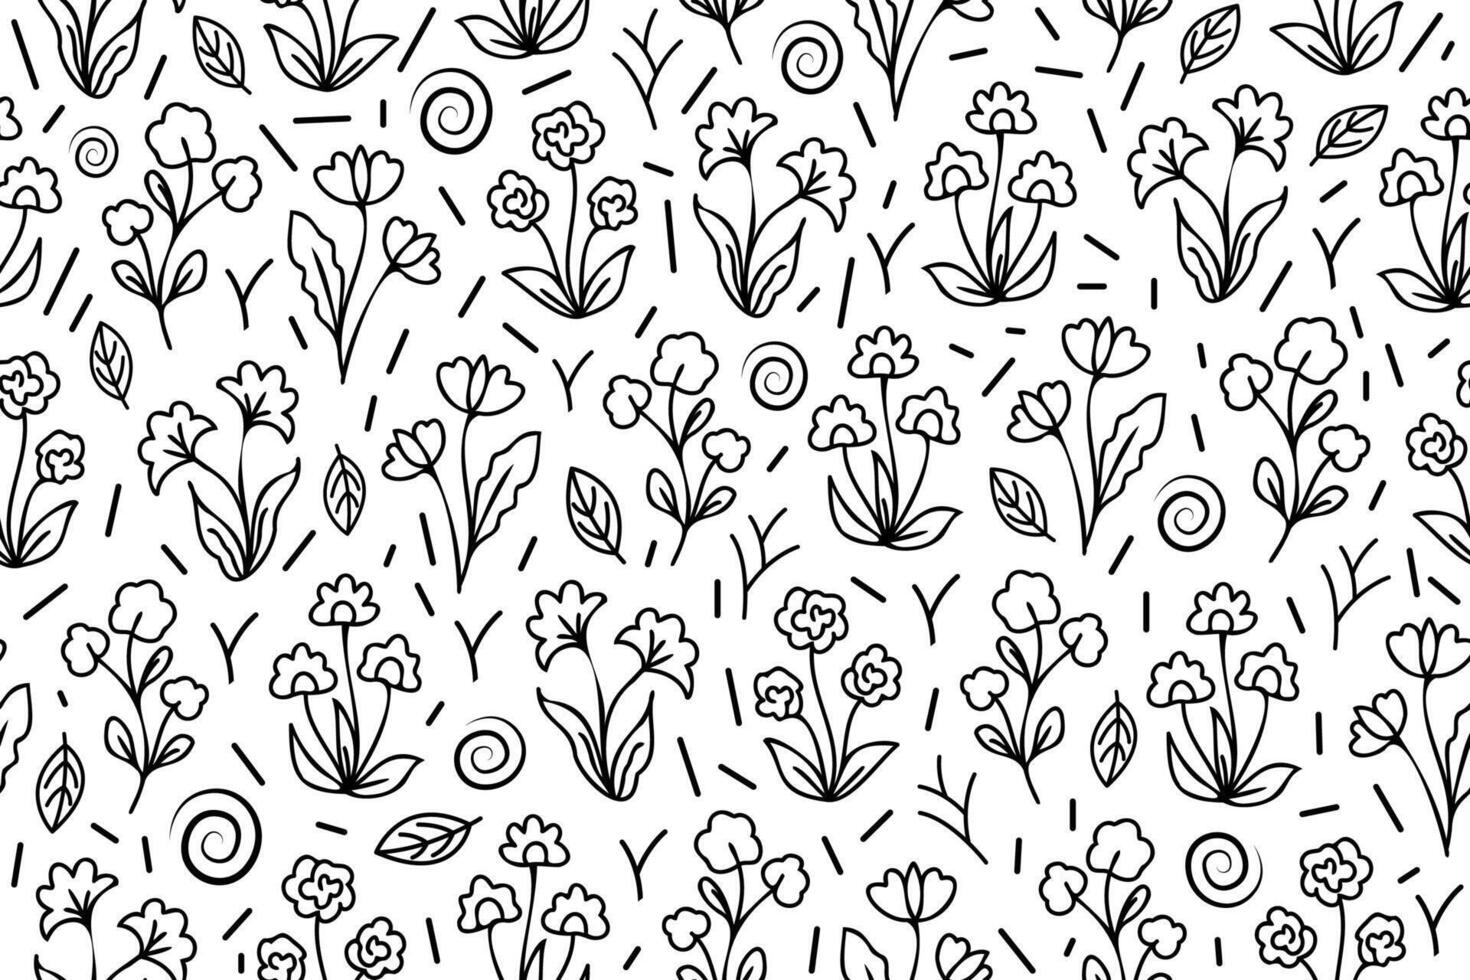 Outline seamless floral pattern with hand drawn flowers. Line art seamless black and white floral pattern. Endless repeating minimalistic abstract design. vector